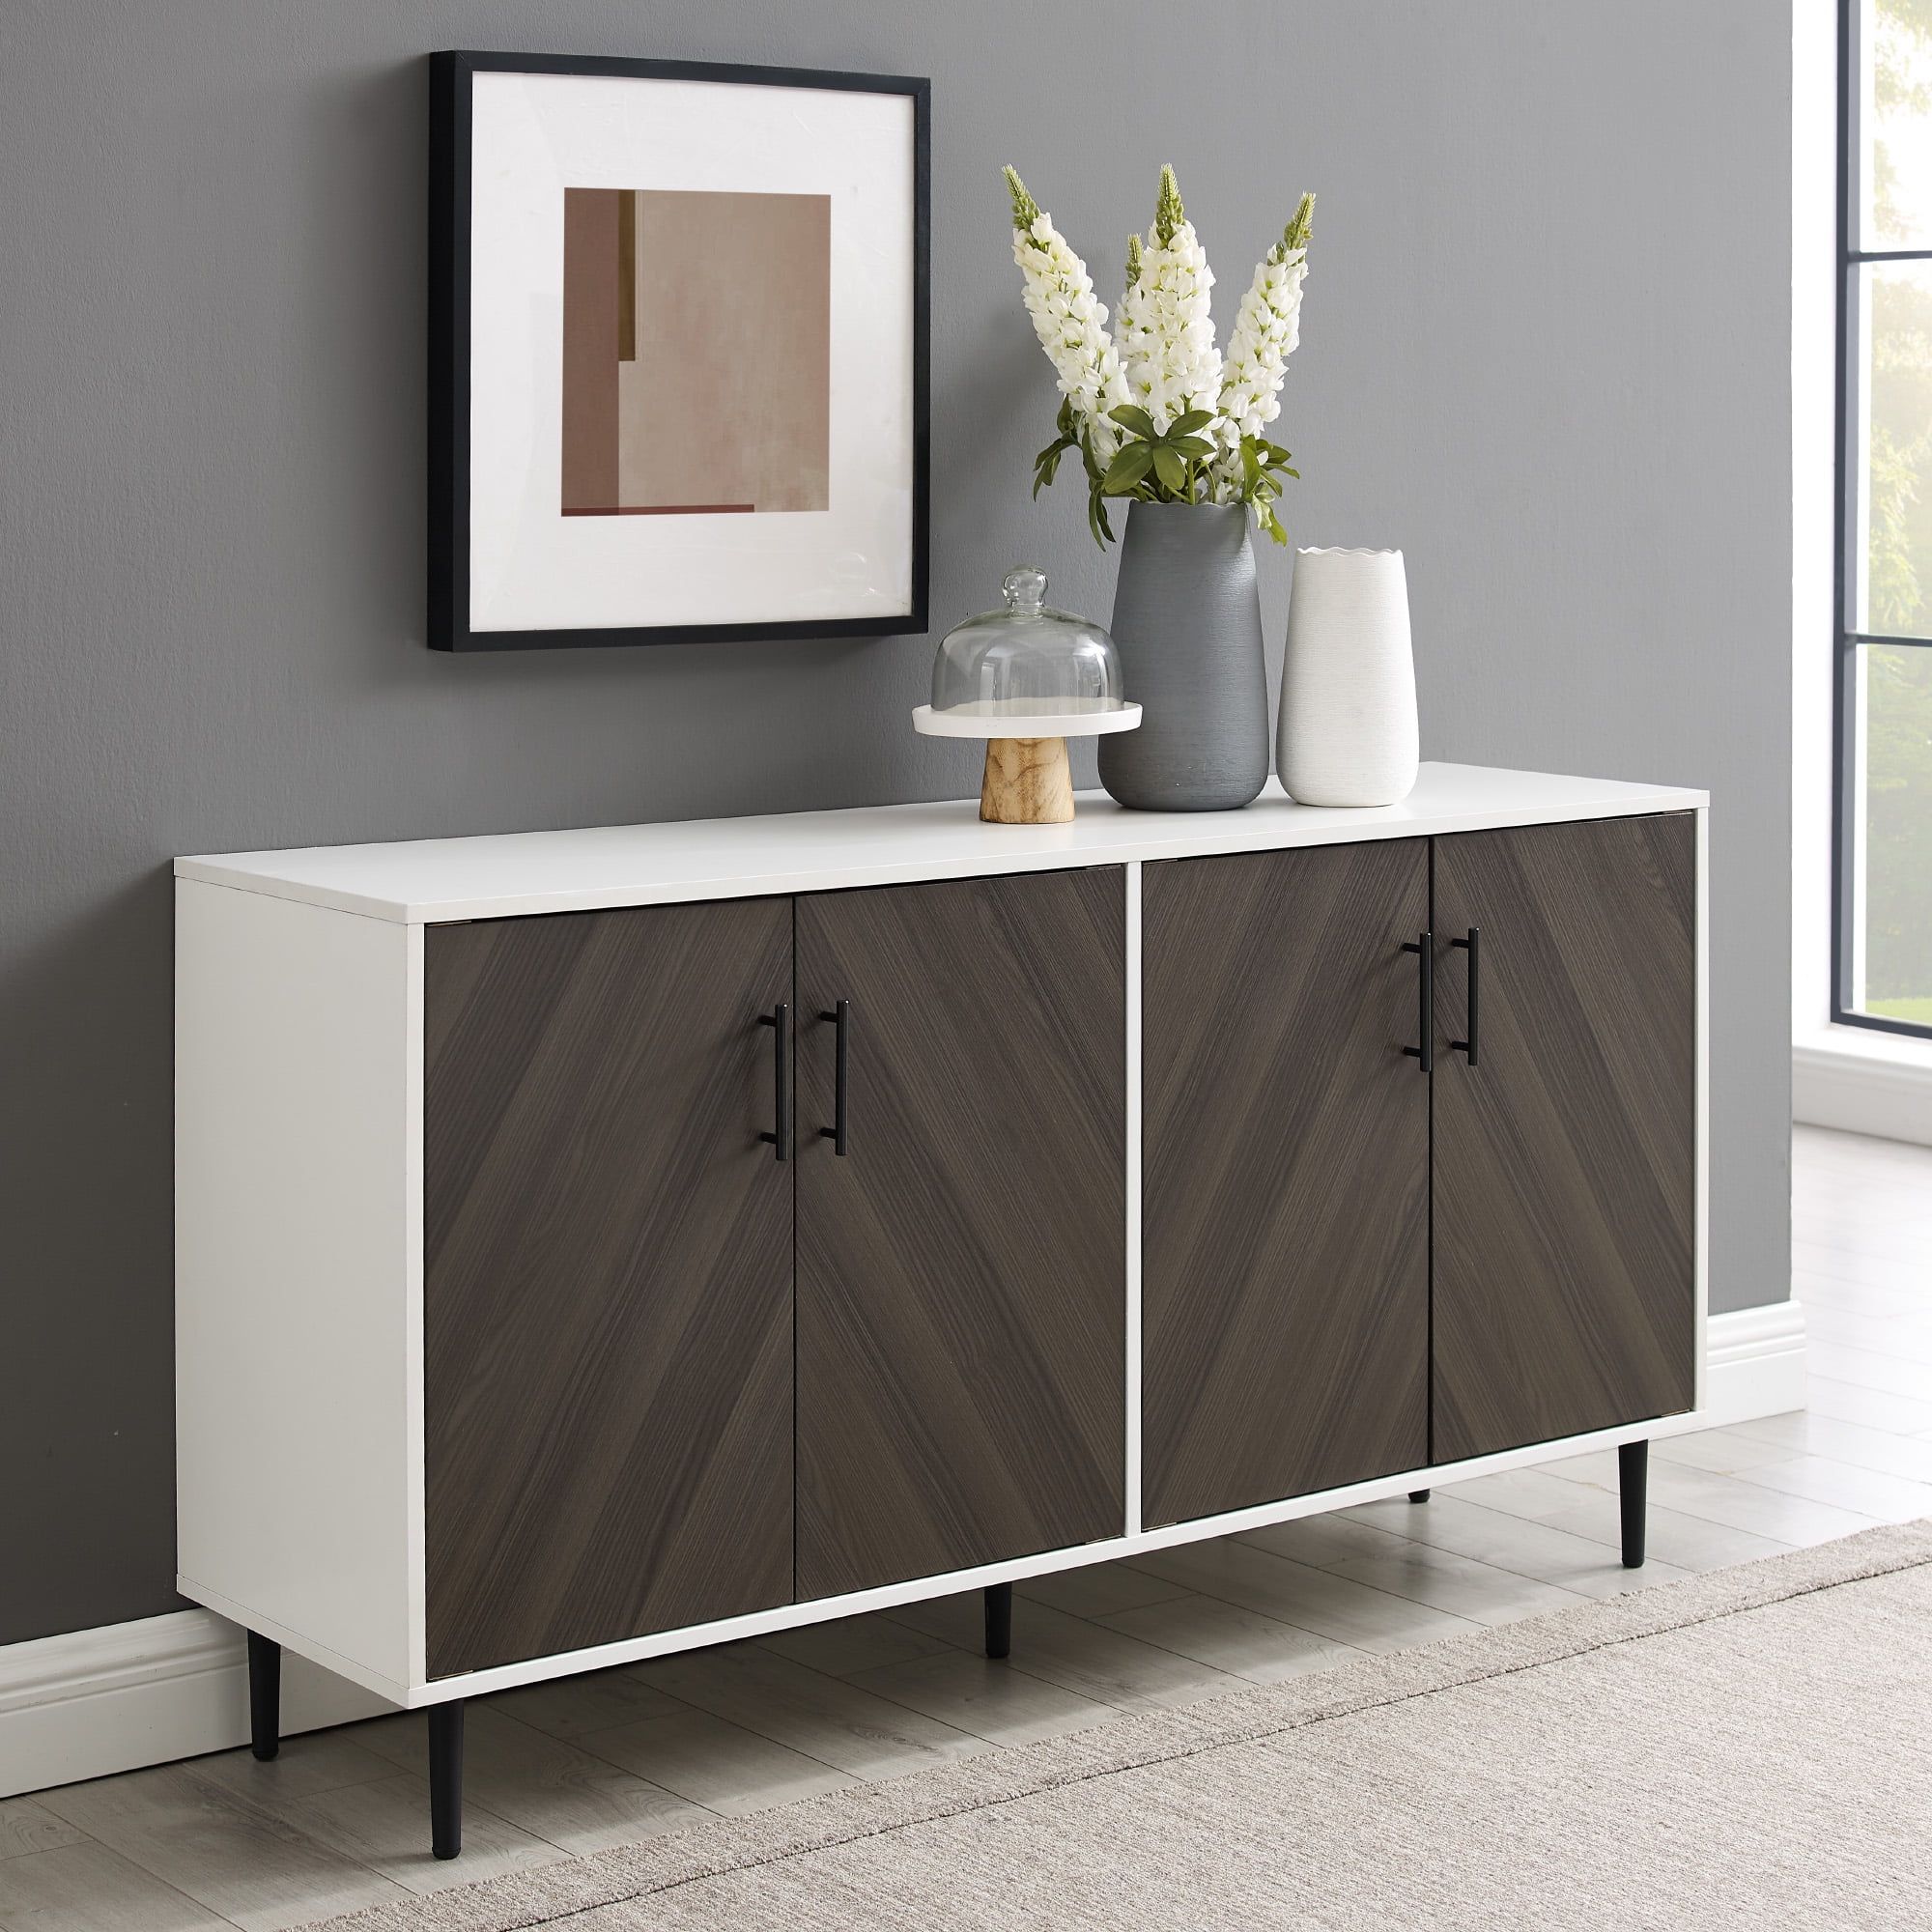 Bellamy Studios Margot Mid Century Bookmatch Dual Cabinet Buffet, Ash Brown  – Walmart Regarding Most Recently Released Sideboards Bookmatch Buffet (Photo 10 of 15)